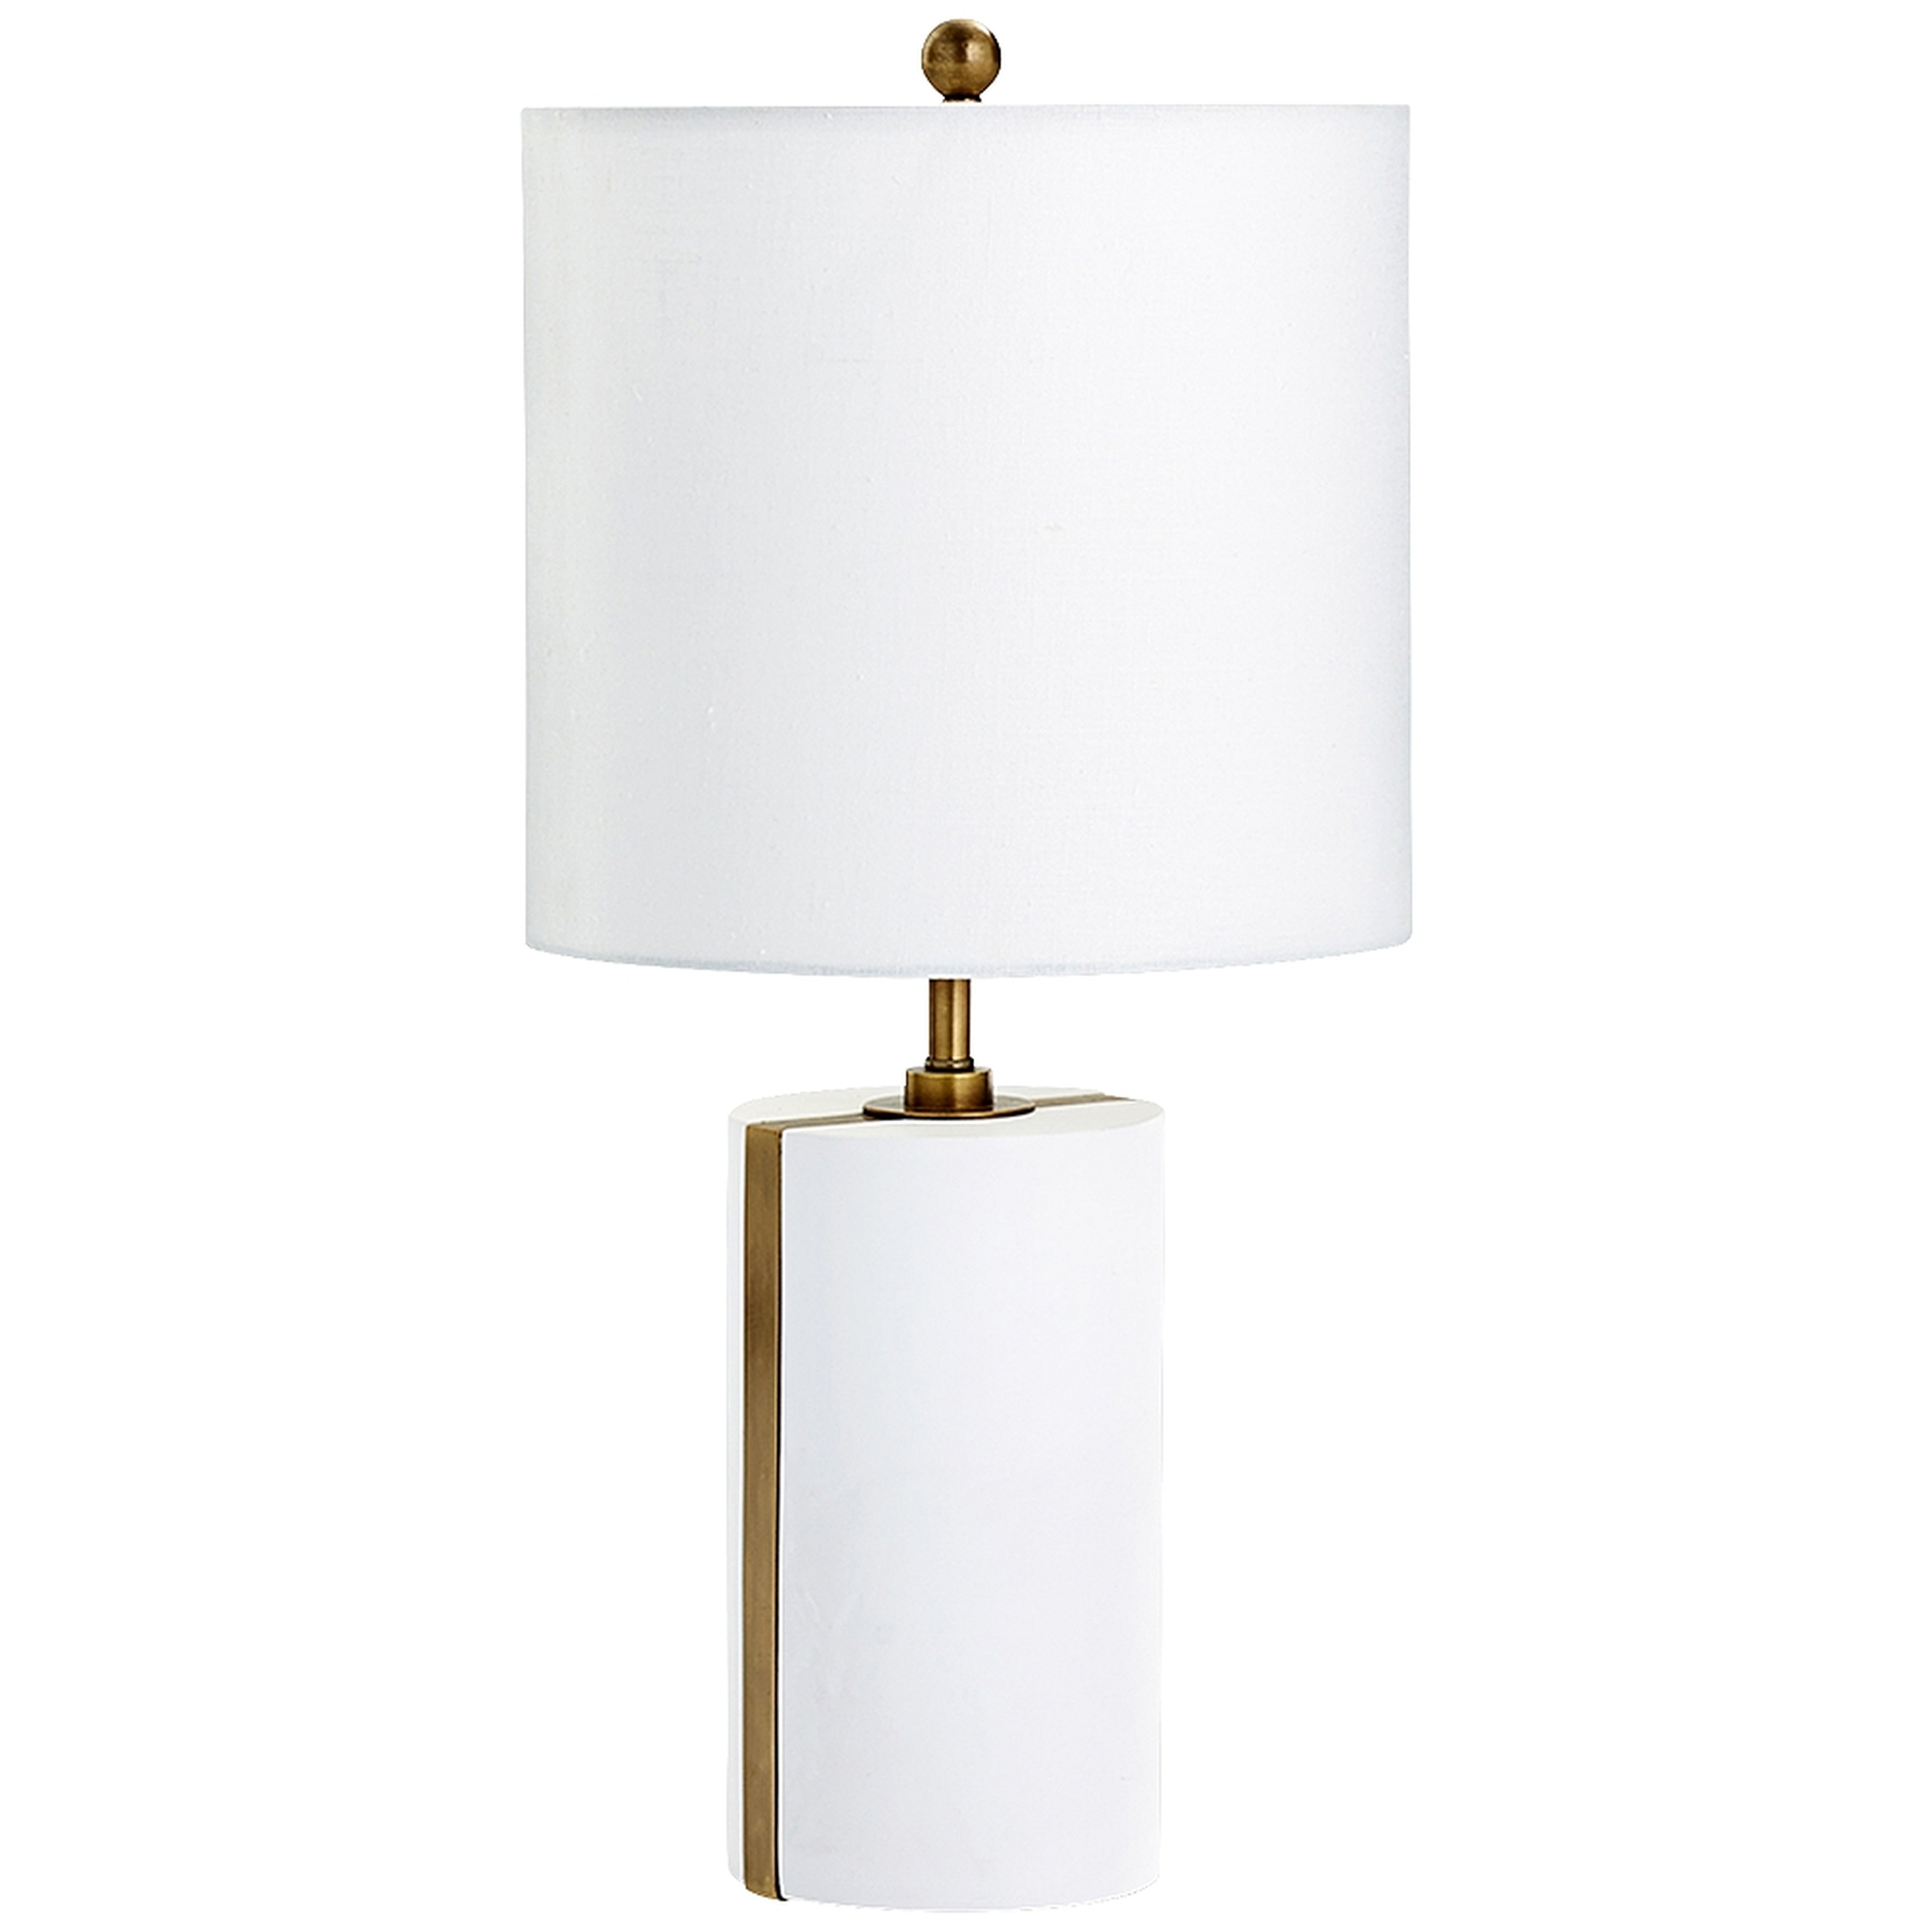 Cylindro Brass Stripe White Plaster Table Lamp - Style # 9C522 - Lamps Plus